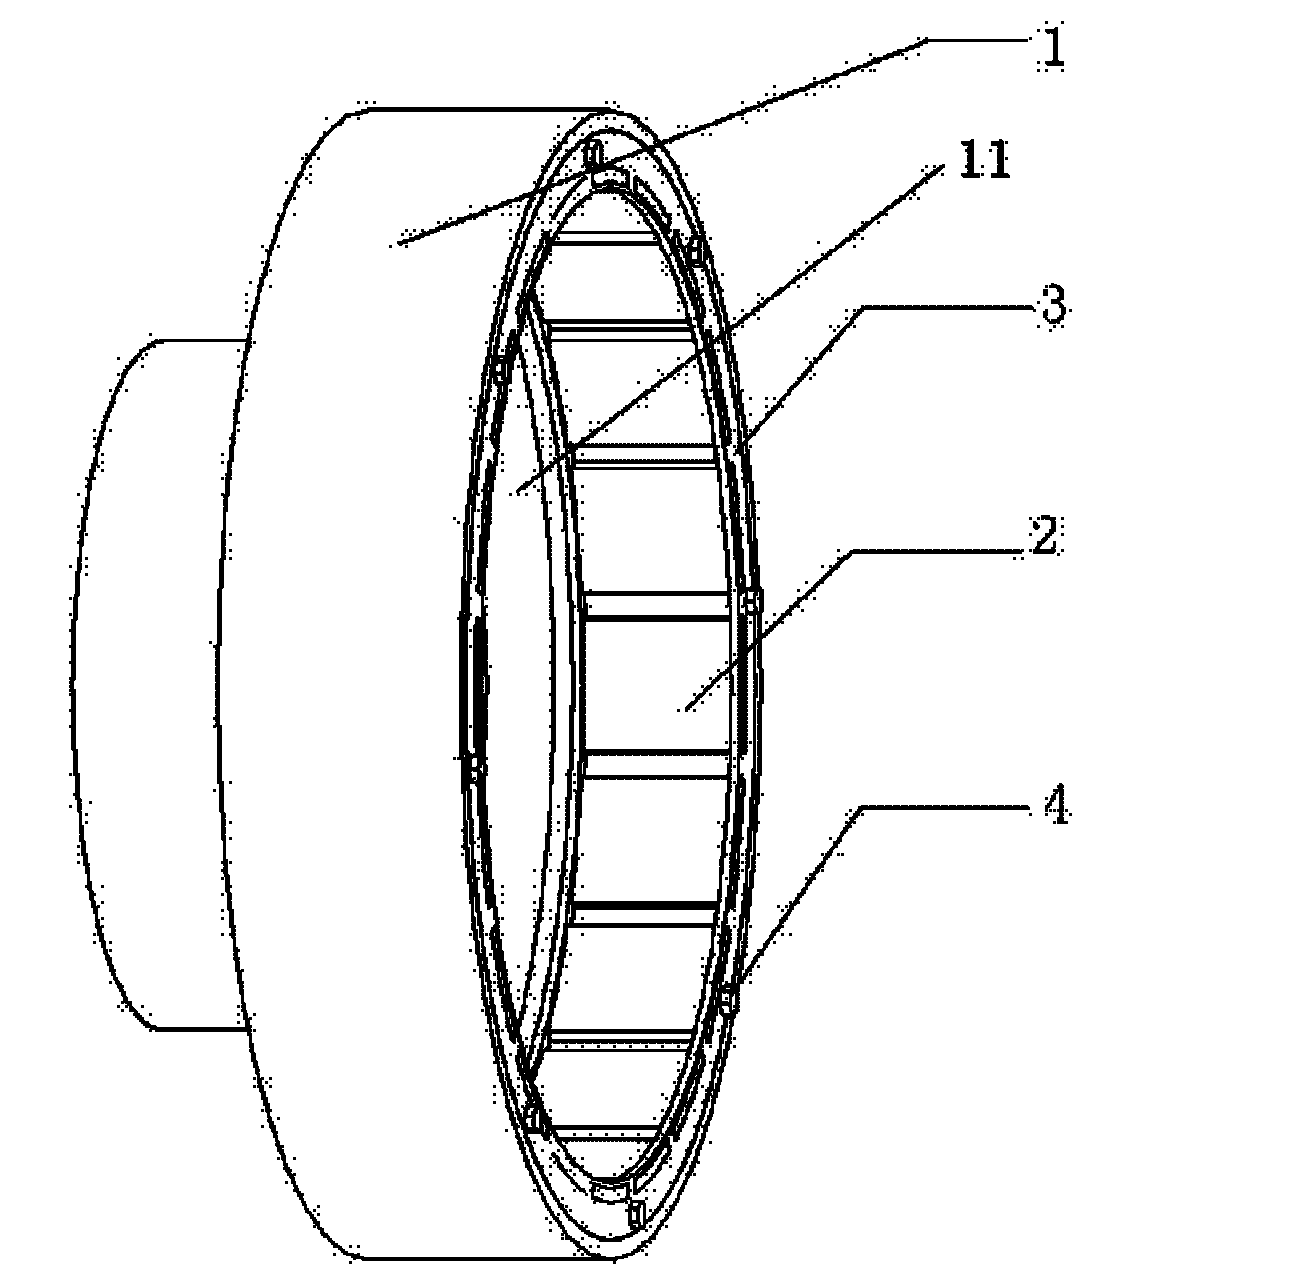 Motor rotor of permanent-magnetic synchronous tractor